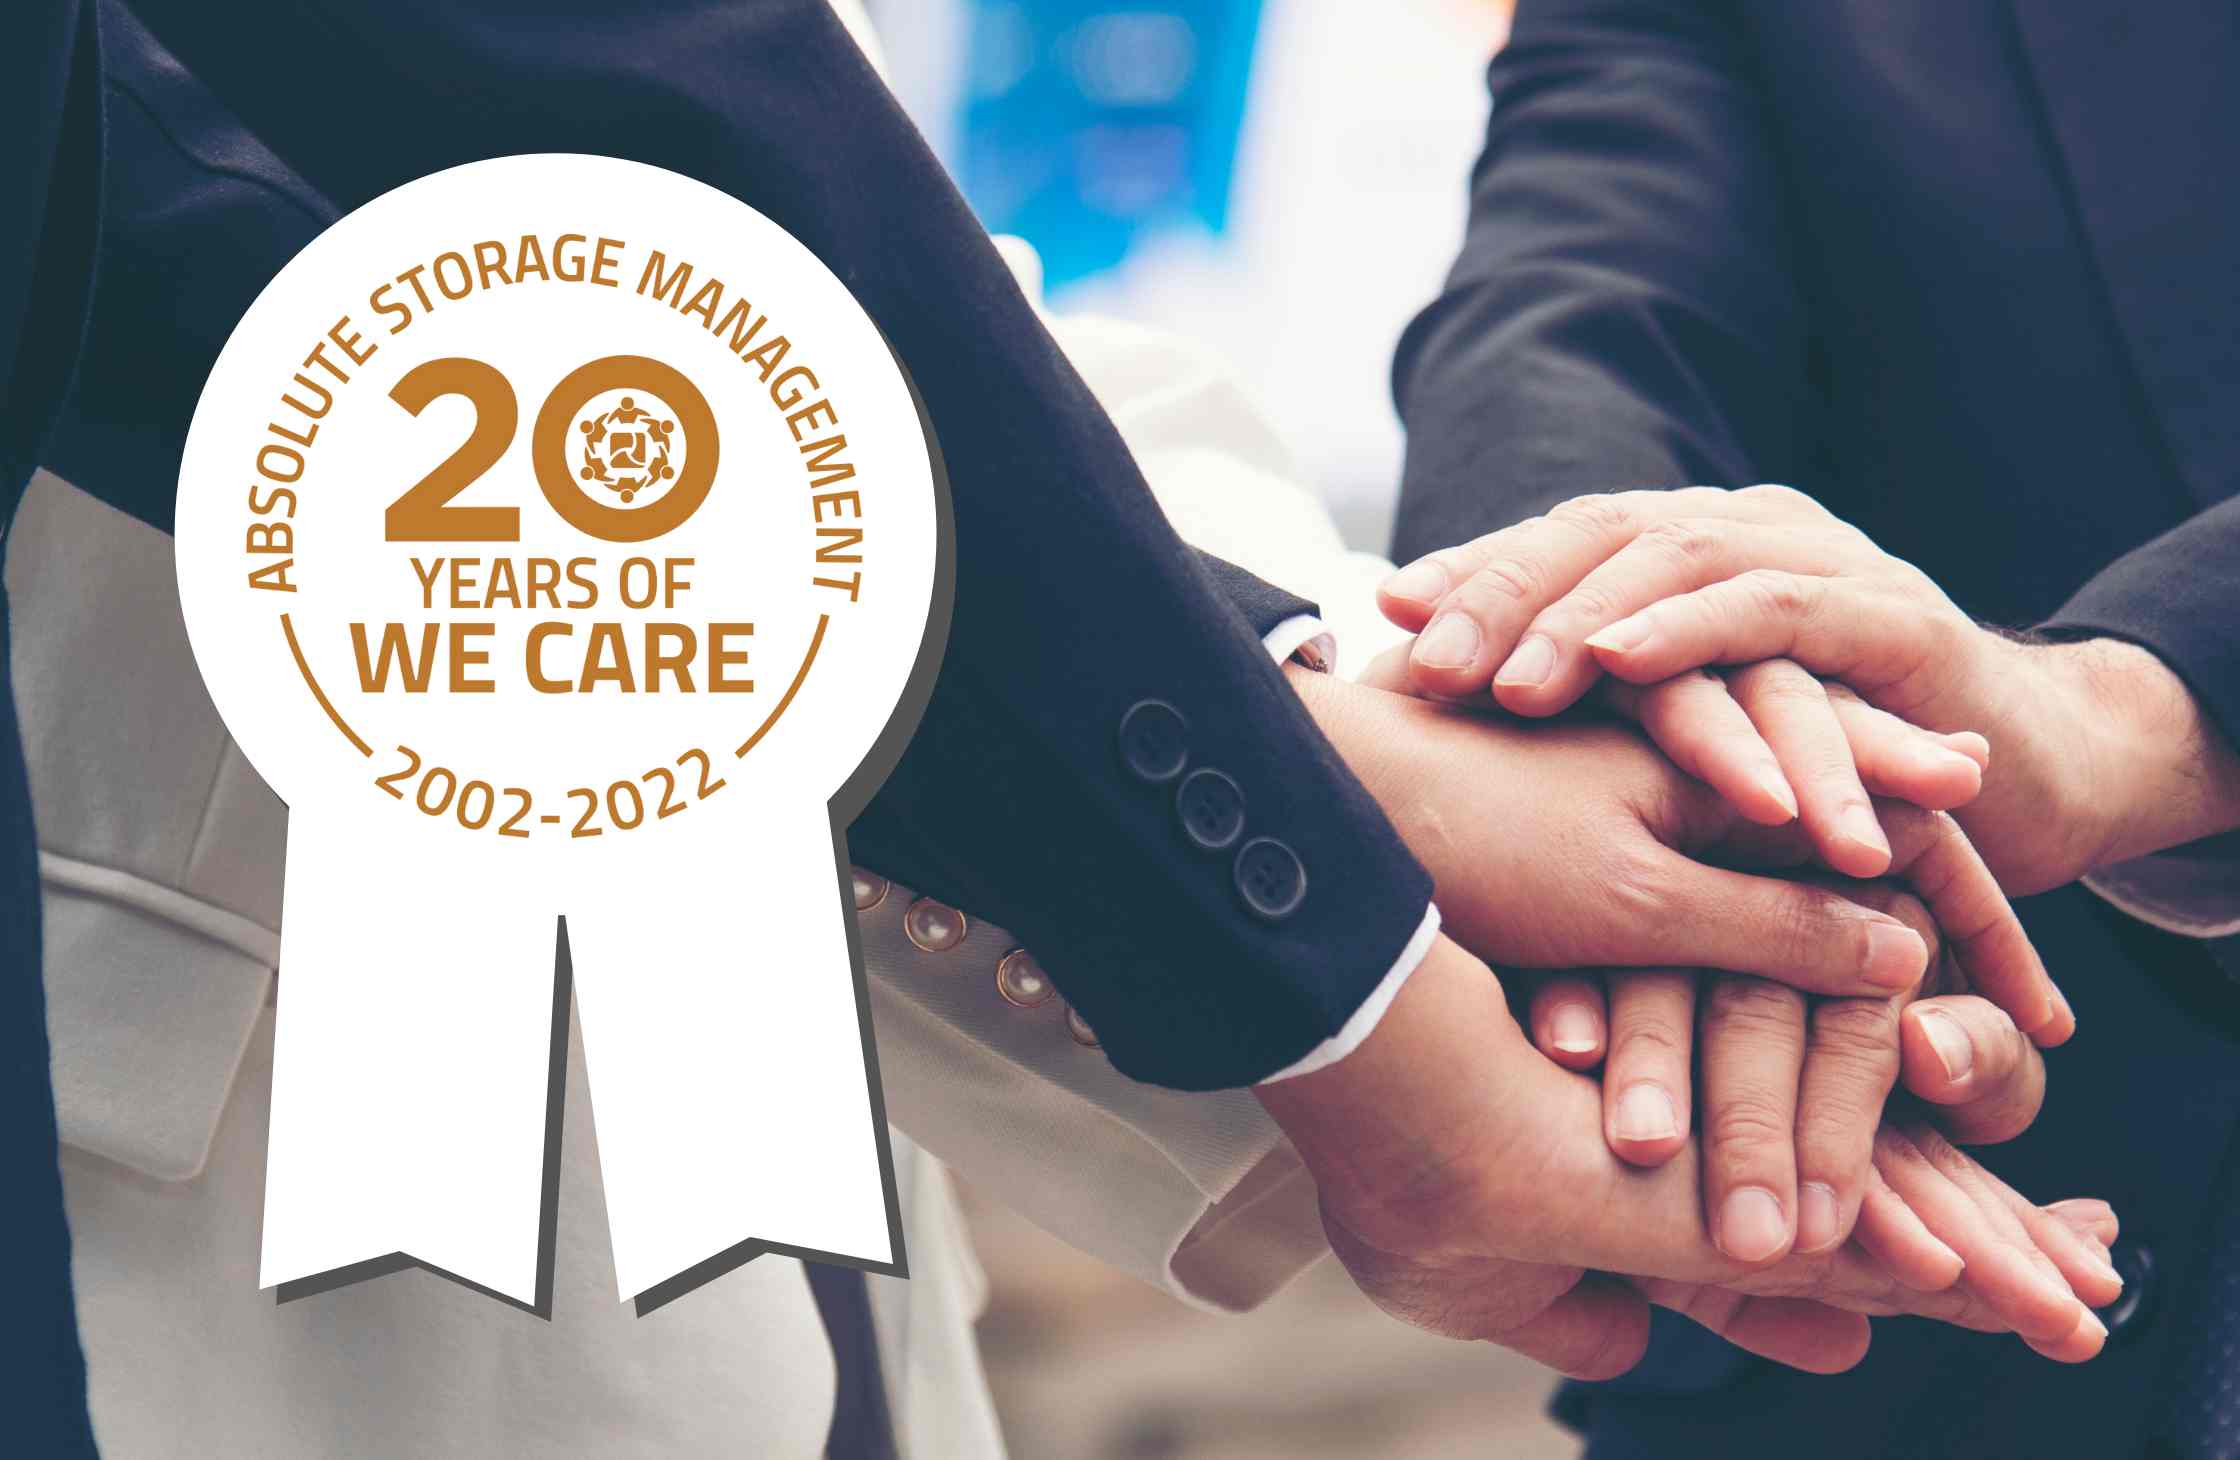 Absolute Storage Management - 20 Years of We Care.